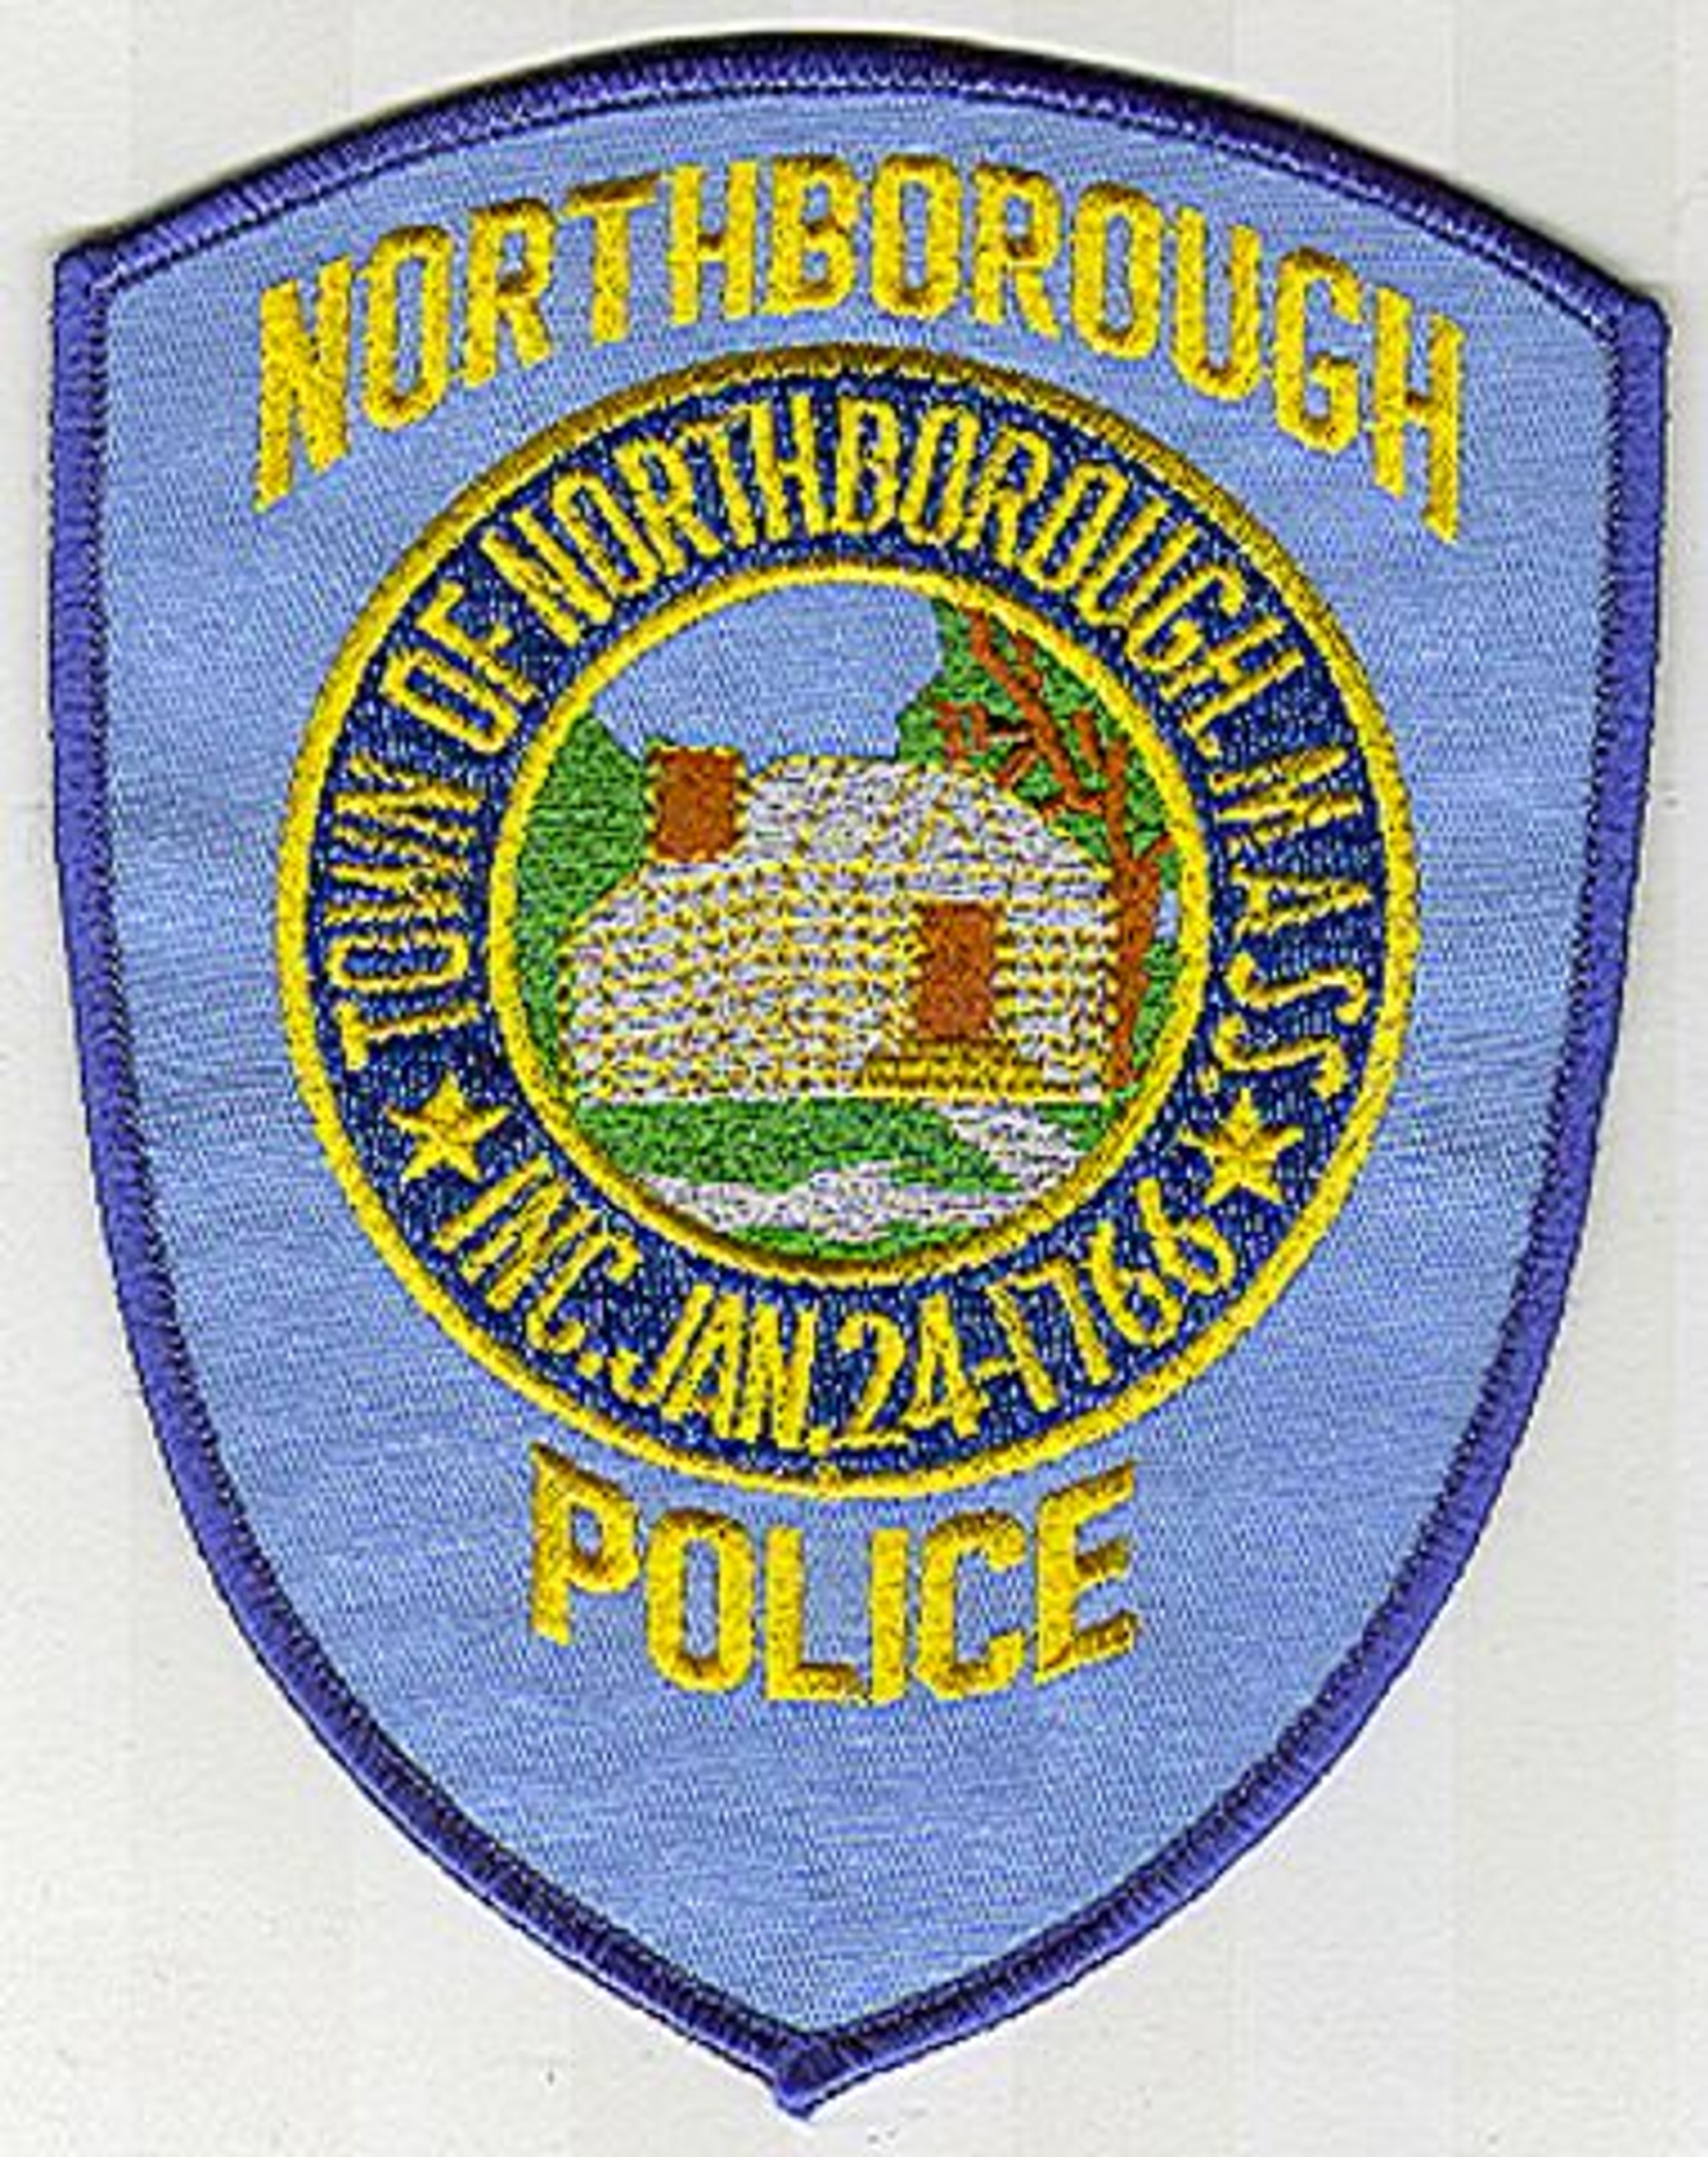 Northborough MA Police Patch